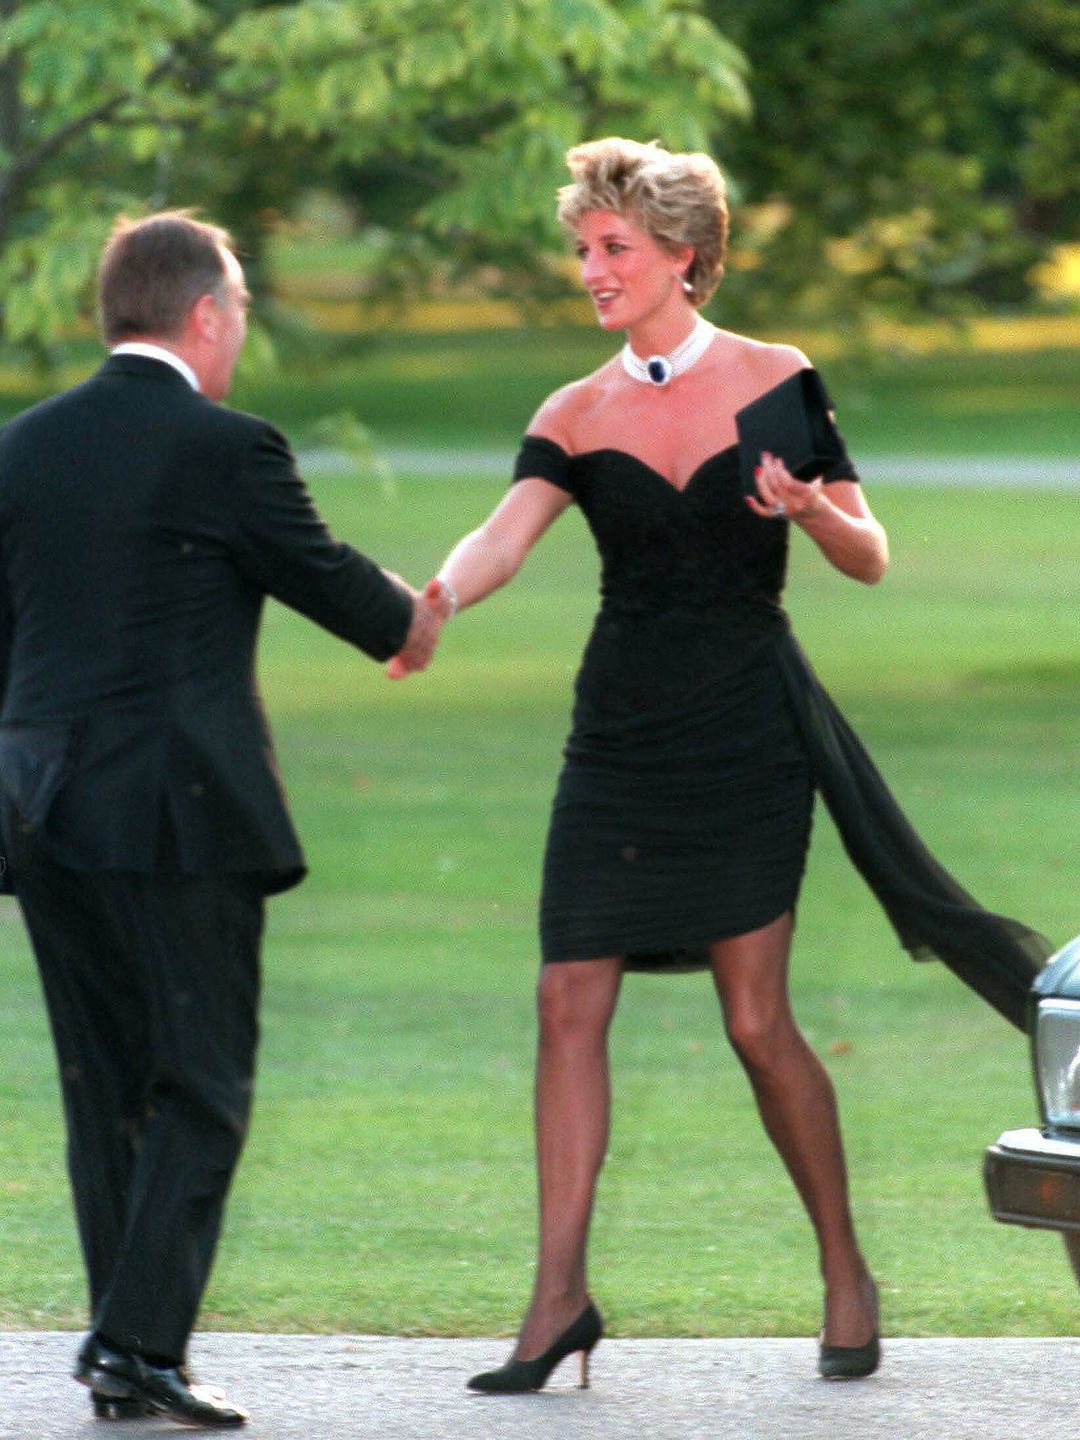 Diana, Princess of Wales, wore her famous black "revenge dress" commissioned from Christina Stambolian, to attend the Vanity Fair party at the Serpentine Gallery on November 20, 1994